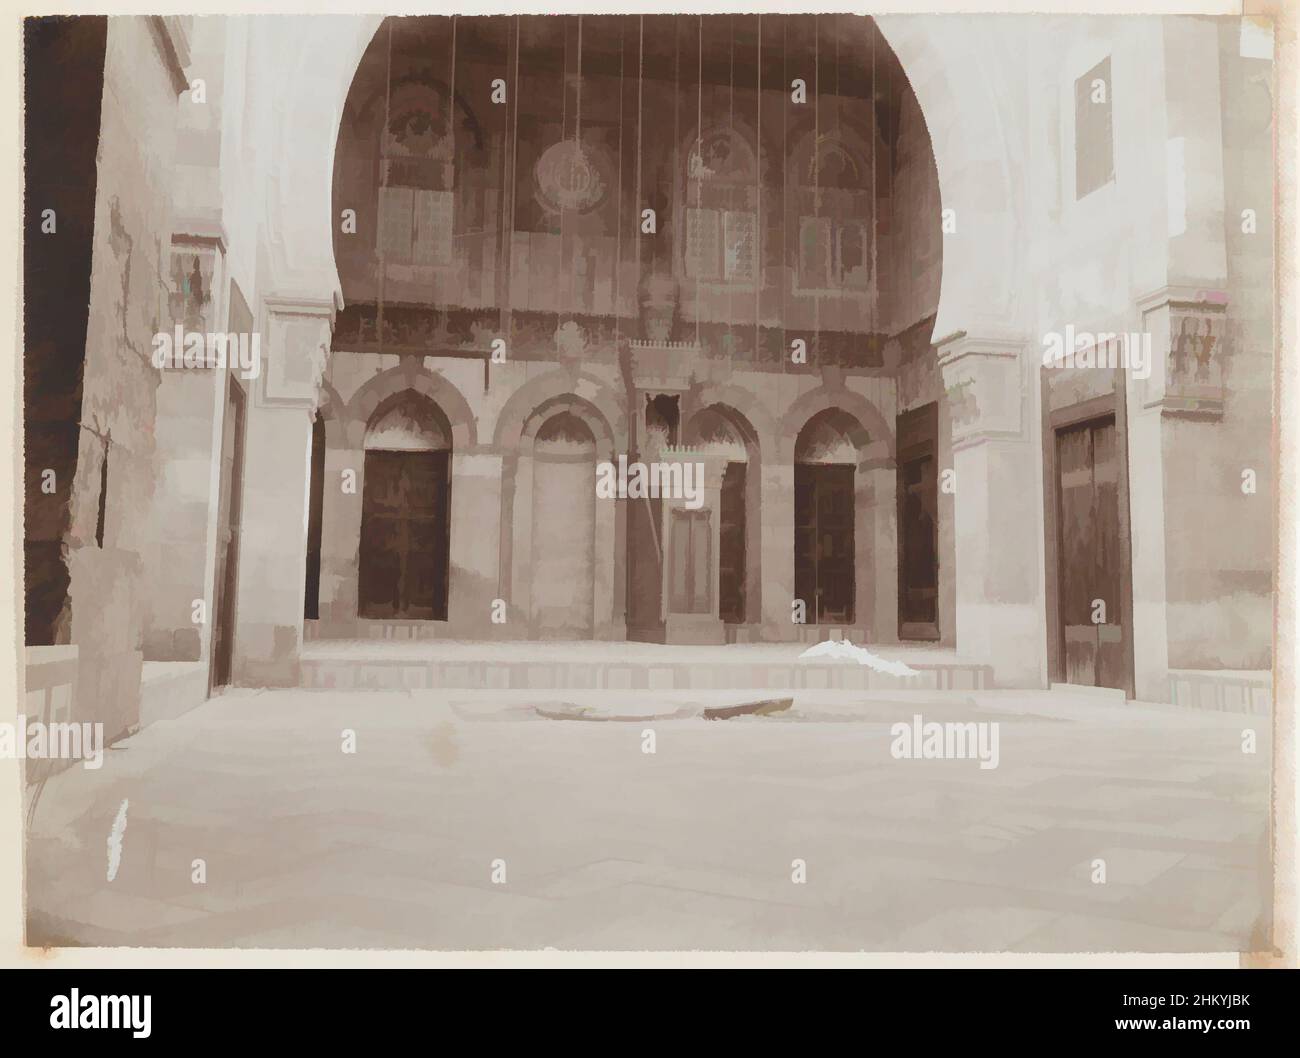 Art inspired by The interior of a mosque, Egyptinternal, L. Heldring, Egypte, 1898, photographic support, height 82 mm × width 109 mm, Classic works modernized by Artotop with a splash of modernity. Shapes, color and value, eye-catching visual impact on art. Emotions through freedom of artworks in a contemporary way. A timeless message pursuing a wildly creative new direction. Artists turning to the digital medium and creating the Artotop NFT Stock Photo